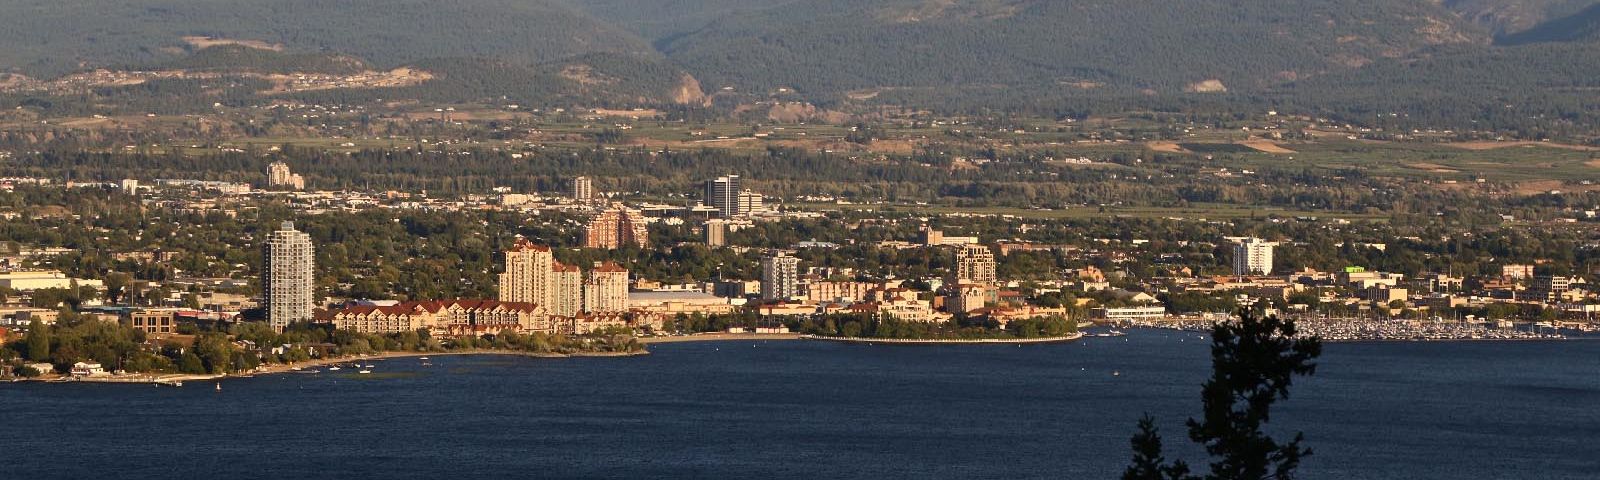 iN PHOTOS: The high-rise future of Kelowna's skyline